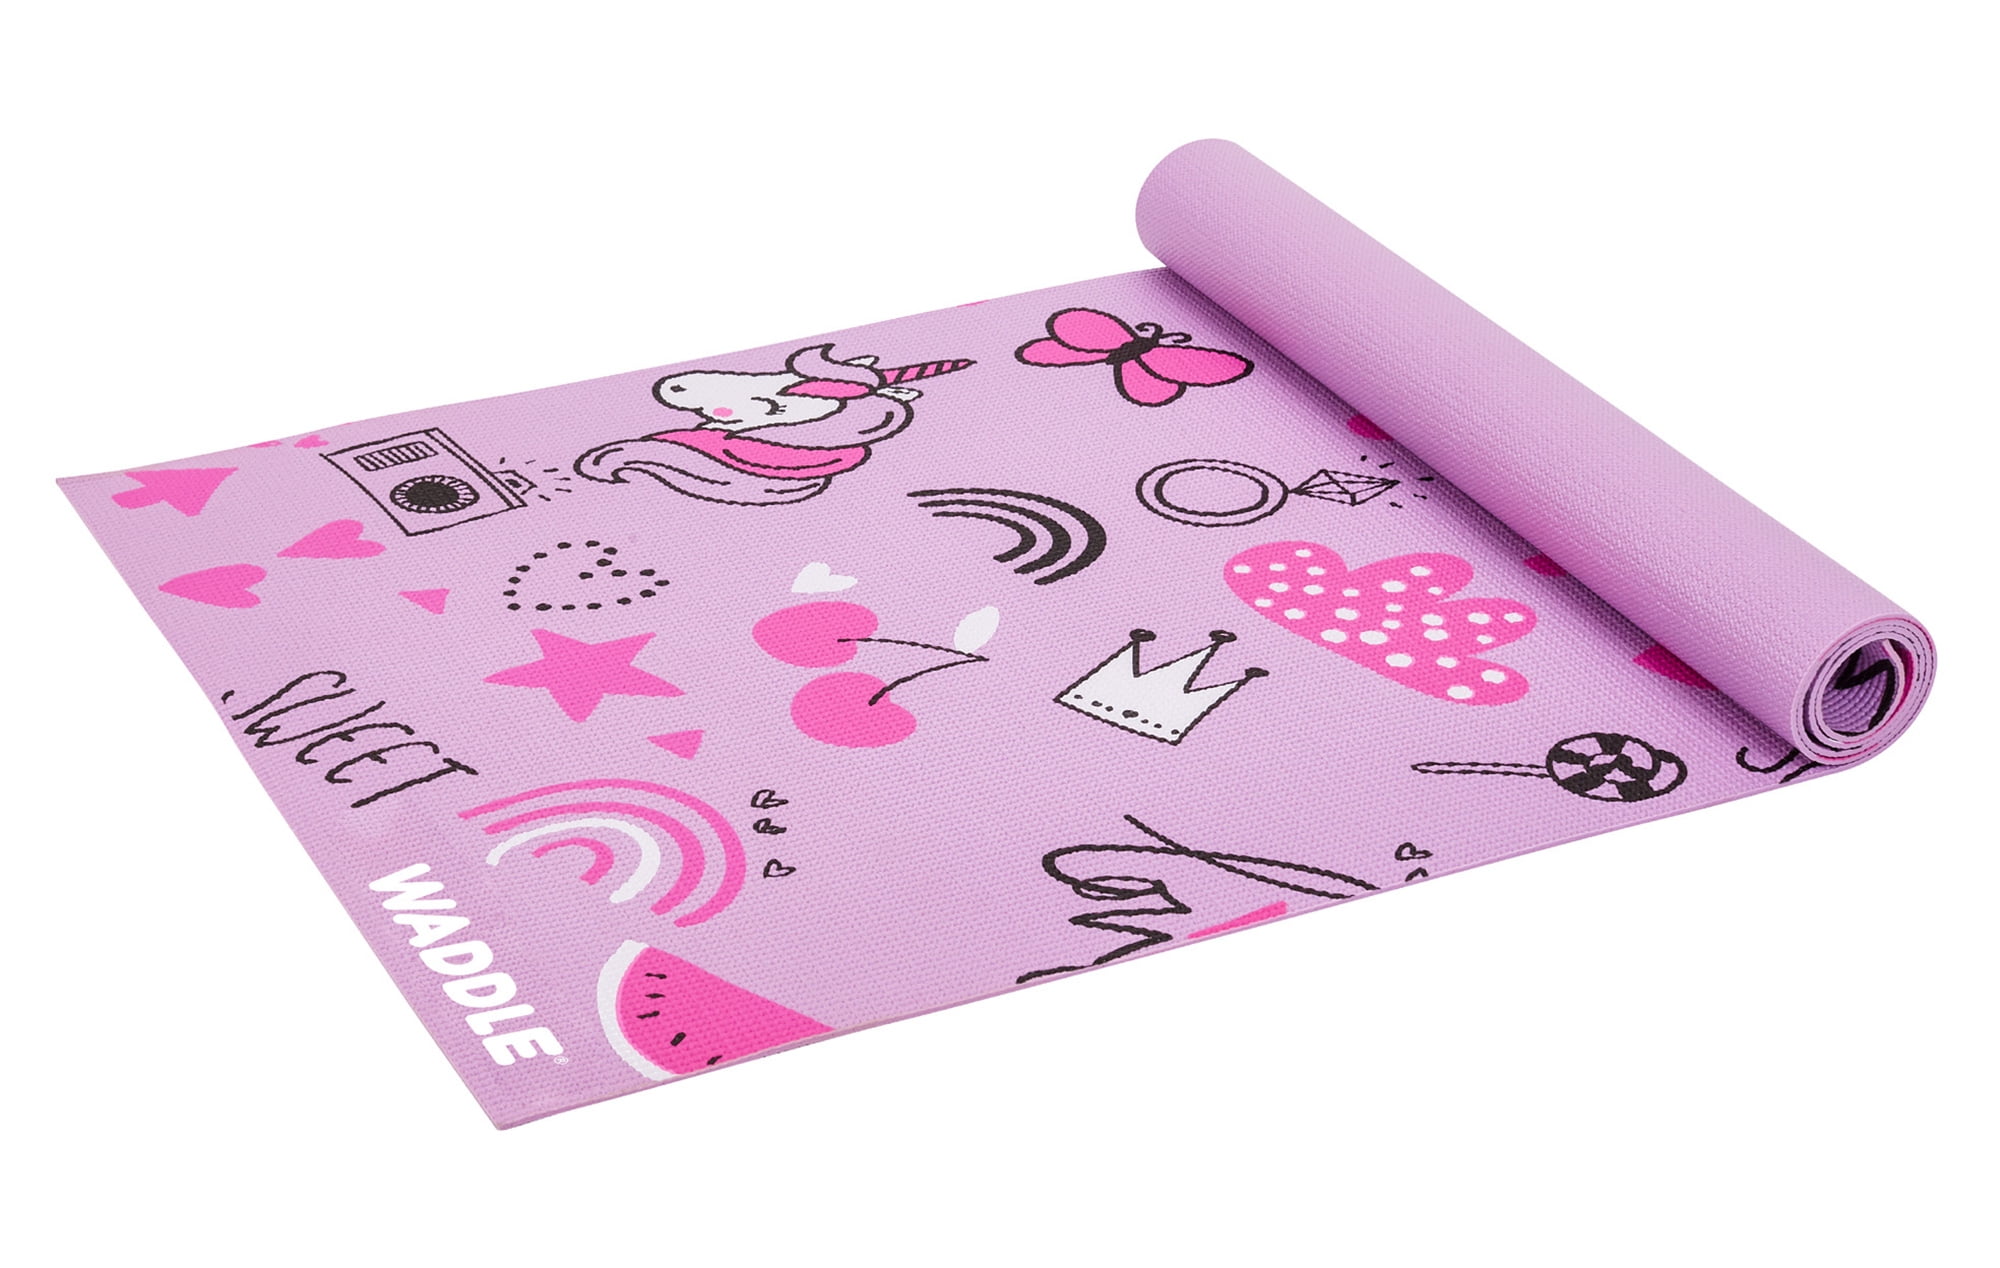 Waddle Yoga Mat, Yoga Mat for Kids, Exercise Mat for Toddlers, Kids Ages 3  Years and Up, Unicorn